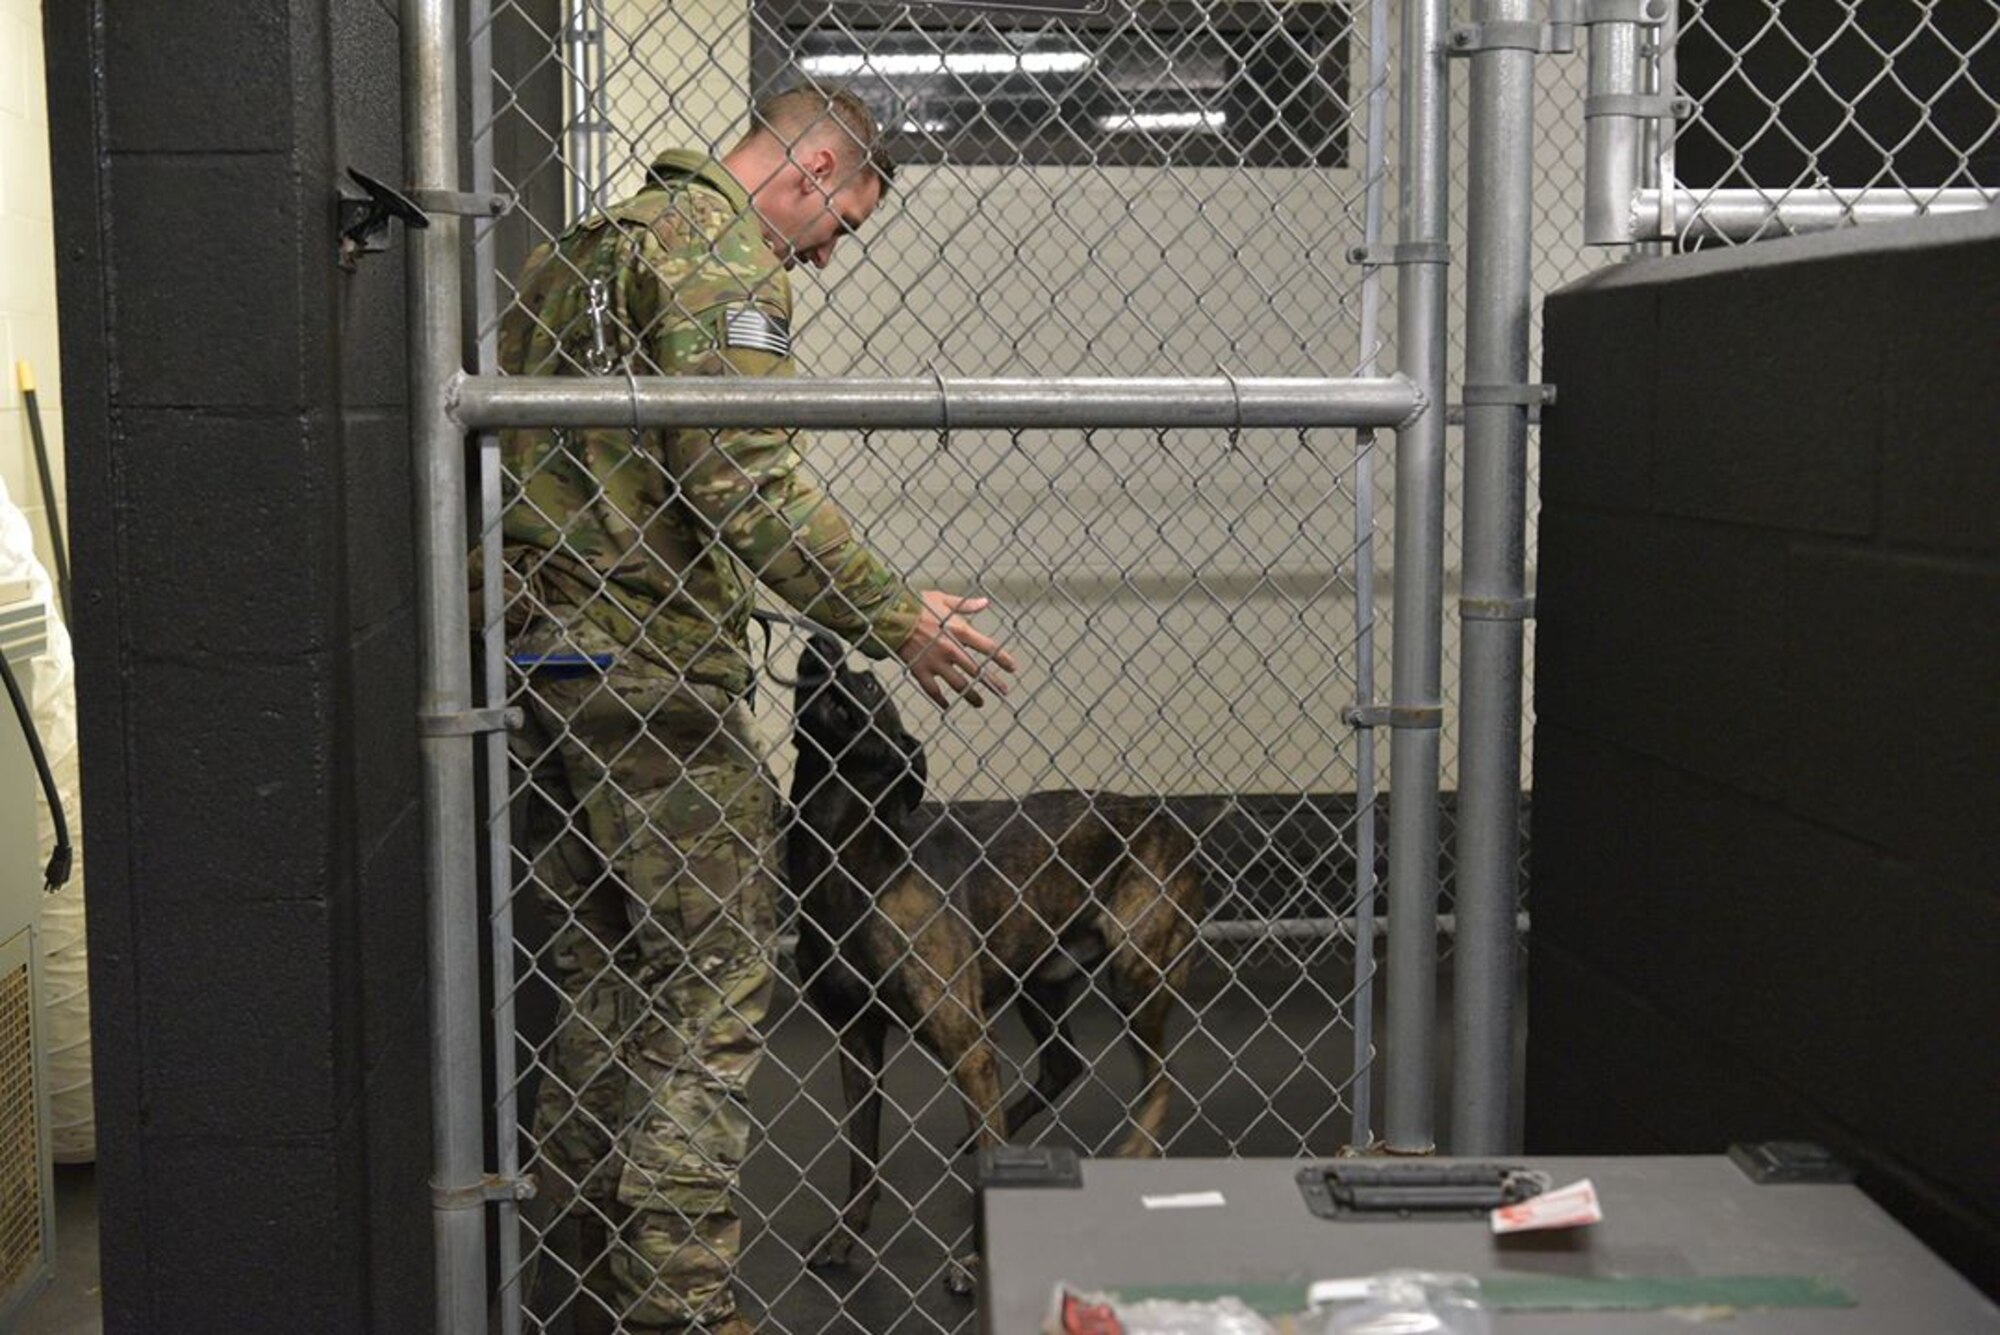 Staff Sgt. Kyle Pethtel, 45th Security Forces Squadron military working dog handler, greets Pieter, his military working dog, at Patrick Air Force Base, Fla., Nov. 26, 2019. Pethtel and Pieter have been a MWD team since July 2019. (U.S. Air Force photo by Senior Airman Dalton Williams)